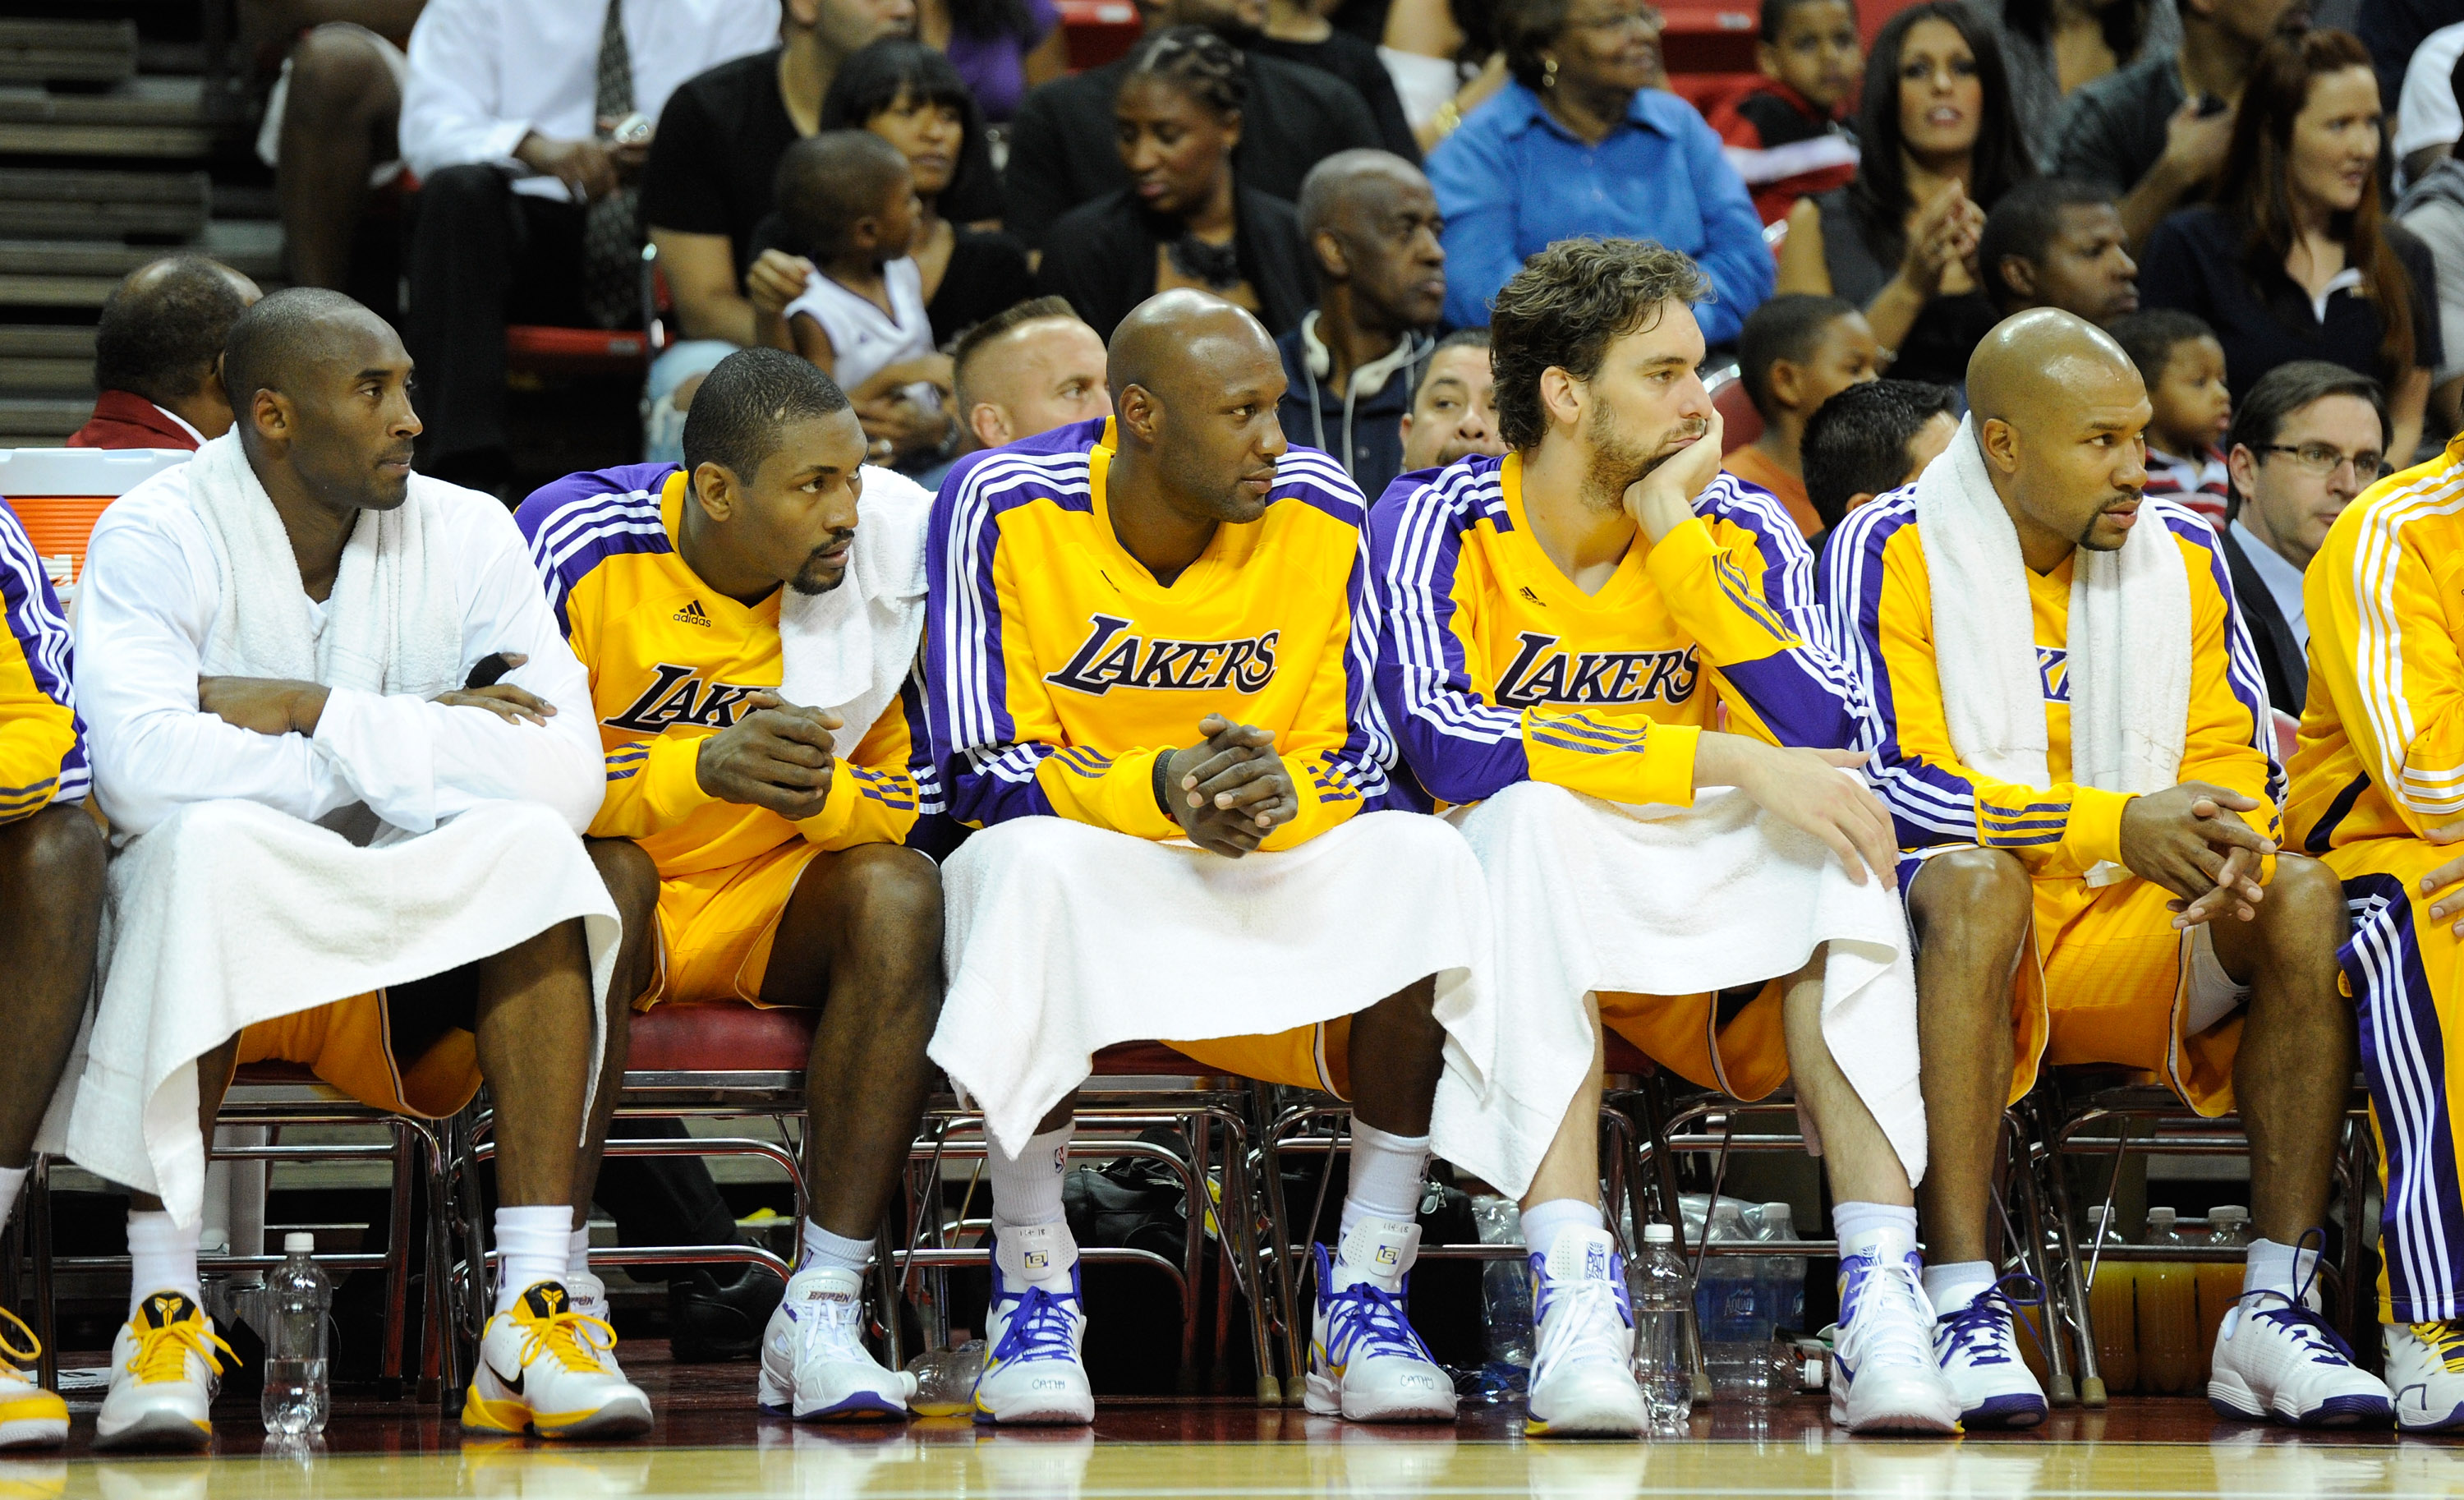 LAS VEGAS - OCTOBER 13:  (L-R) Kobe Bryant #24, Ron Artest #15, Lamar Odom #7, Pau Gasol #16 and Derek Fisher #2 of the Los Angeles Lakers watch from the bench during a preseason game against the Sacramento Kings at the Thomas & Mack Center October 13, 20